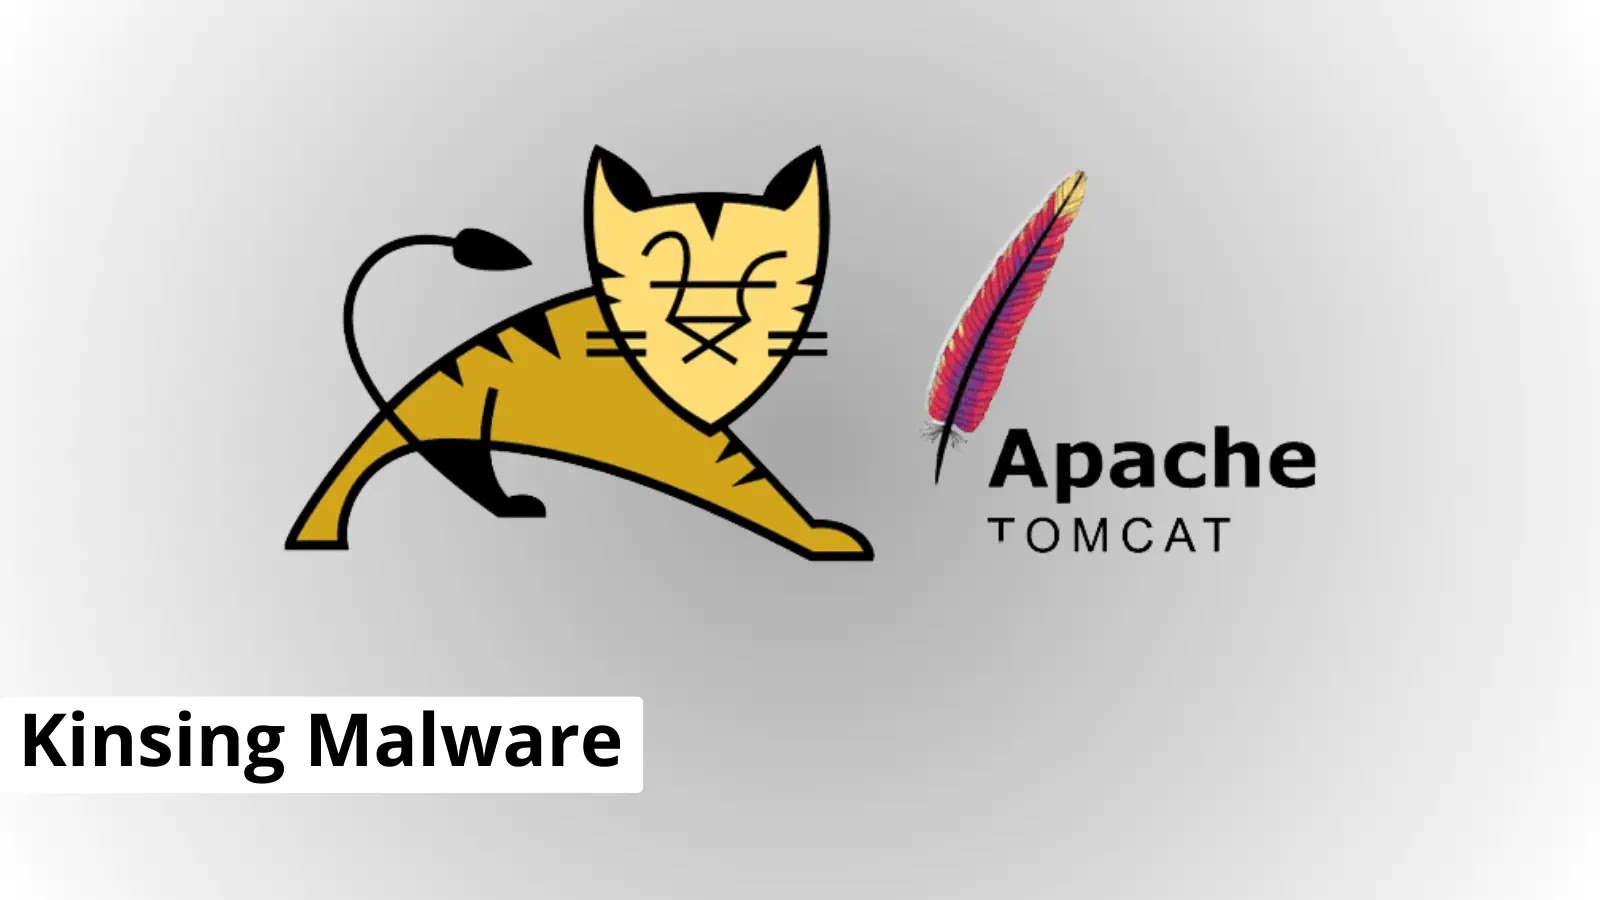 Kinsing Malware Attacking Apache Tomcat Servers To Deploy Cryptominers